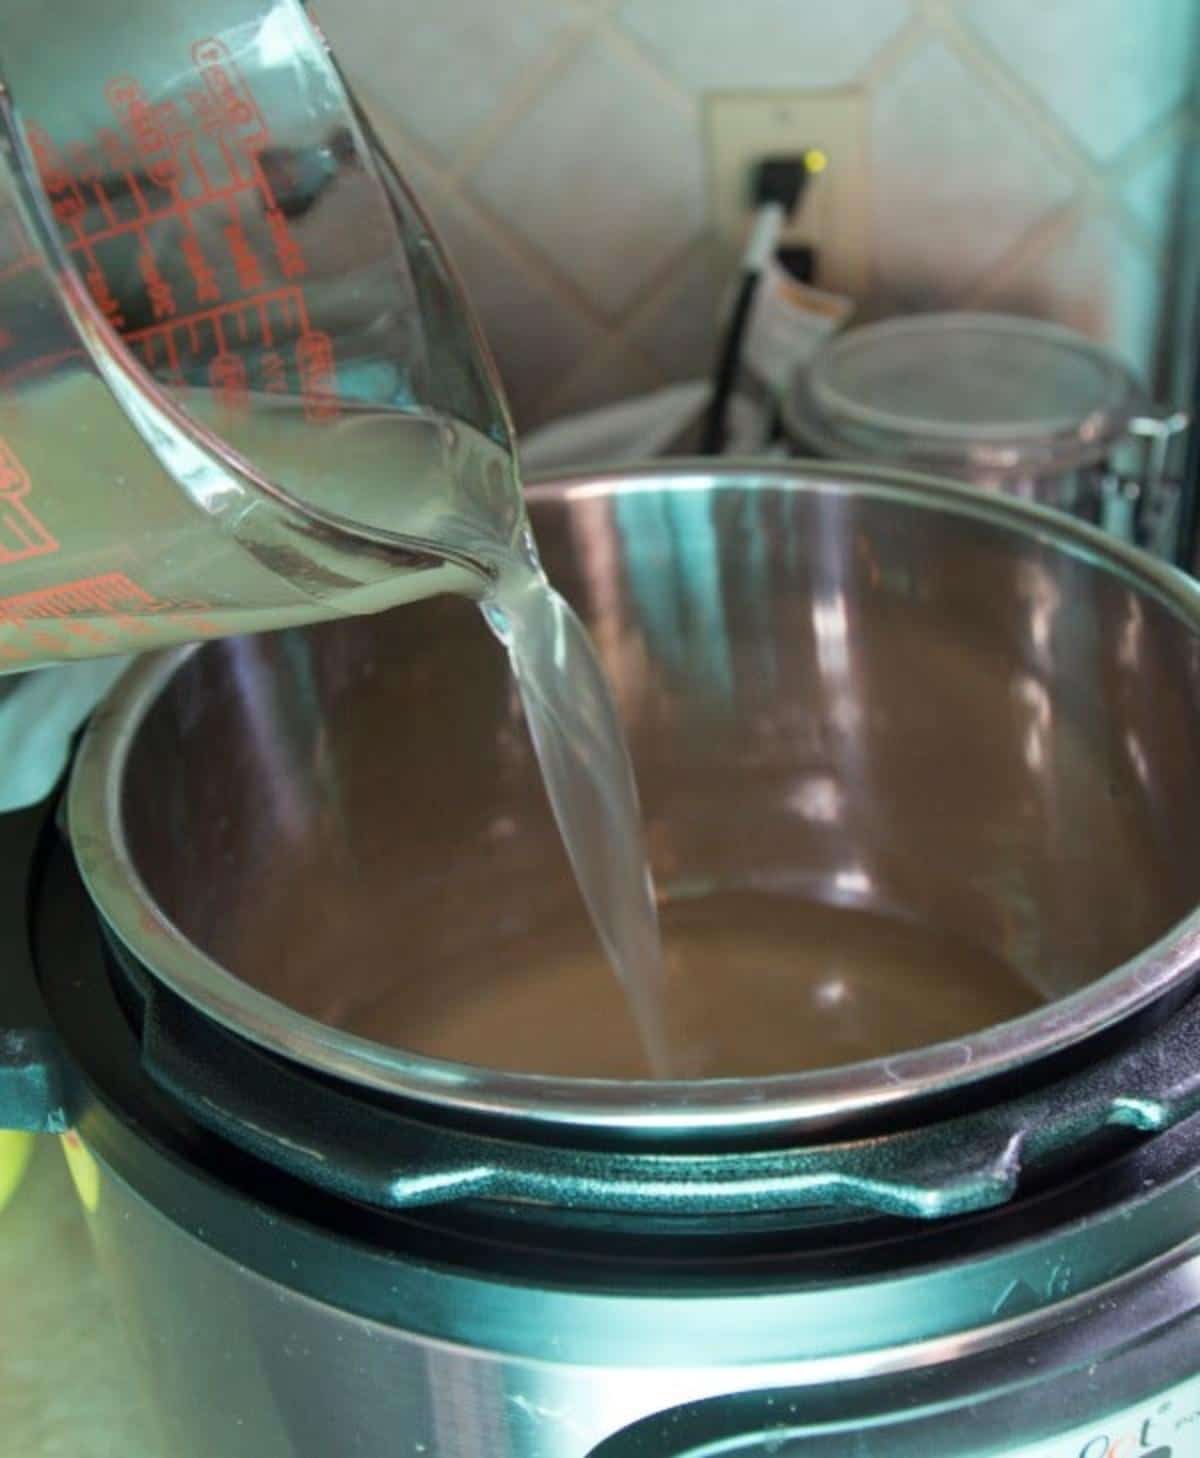 Broth being poured from a glass measuring cup into an instant pot.